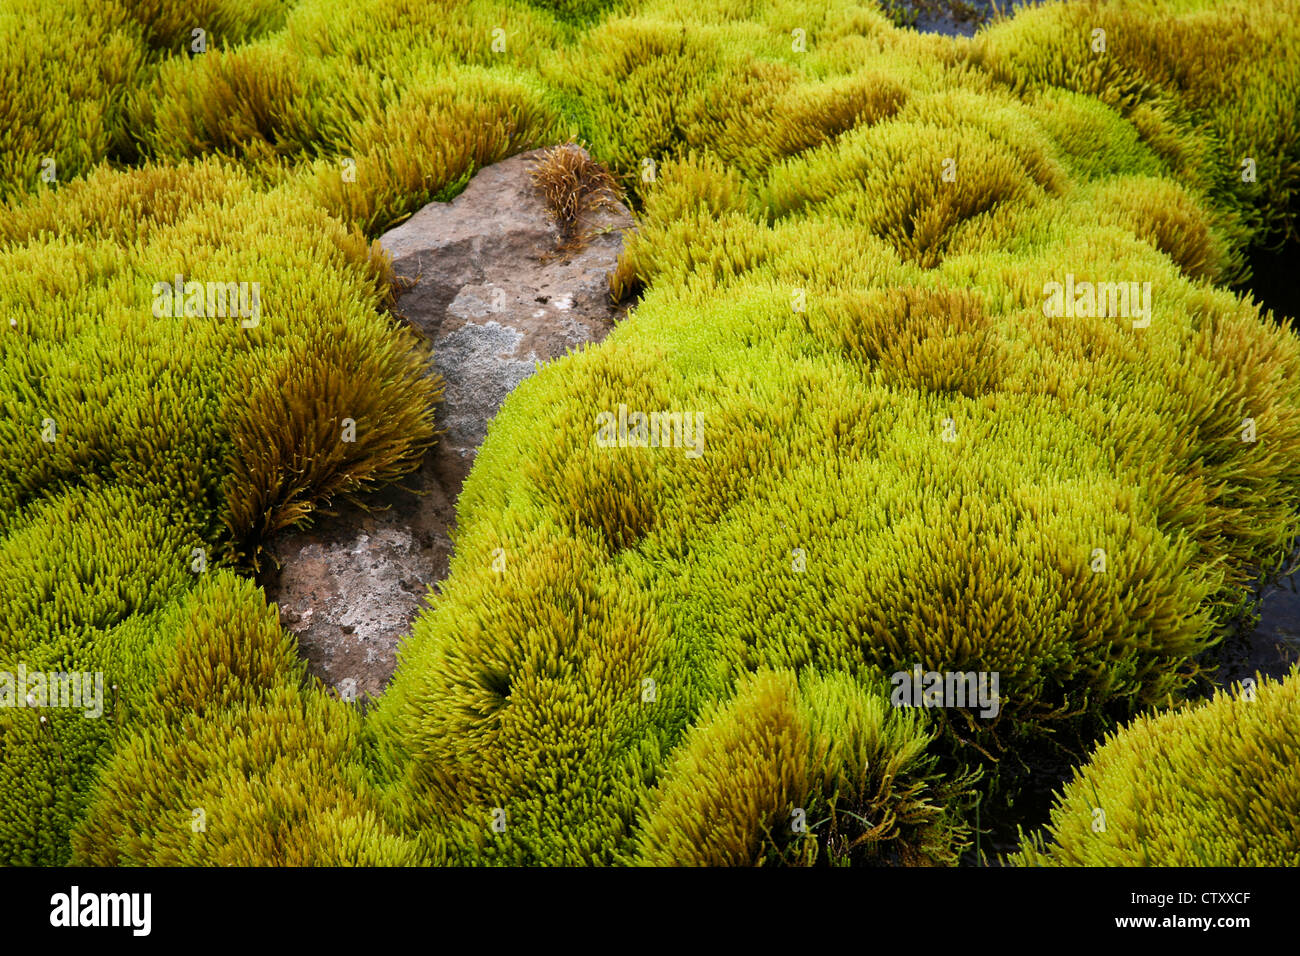 Close up ground moss abstract patterns close up, Cetraria Islandica, plants covering lava and rocks in a bog abstract, Iceland, Europe, Icelandic Stock Photo